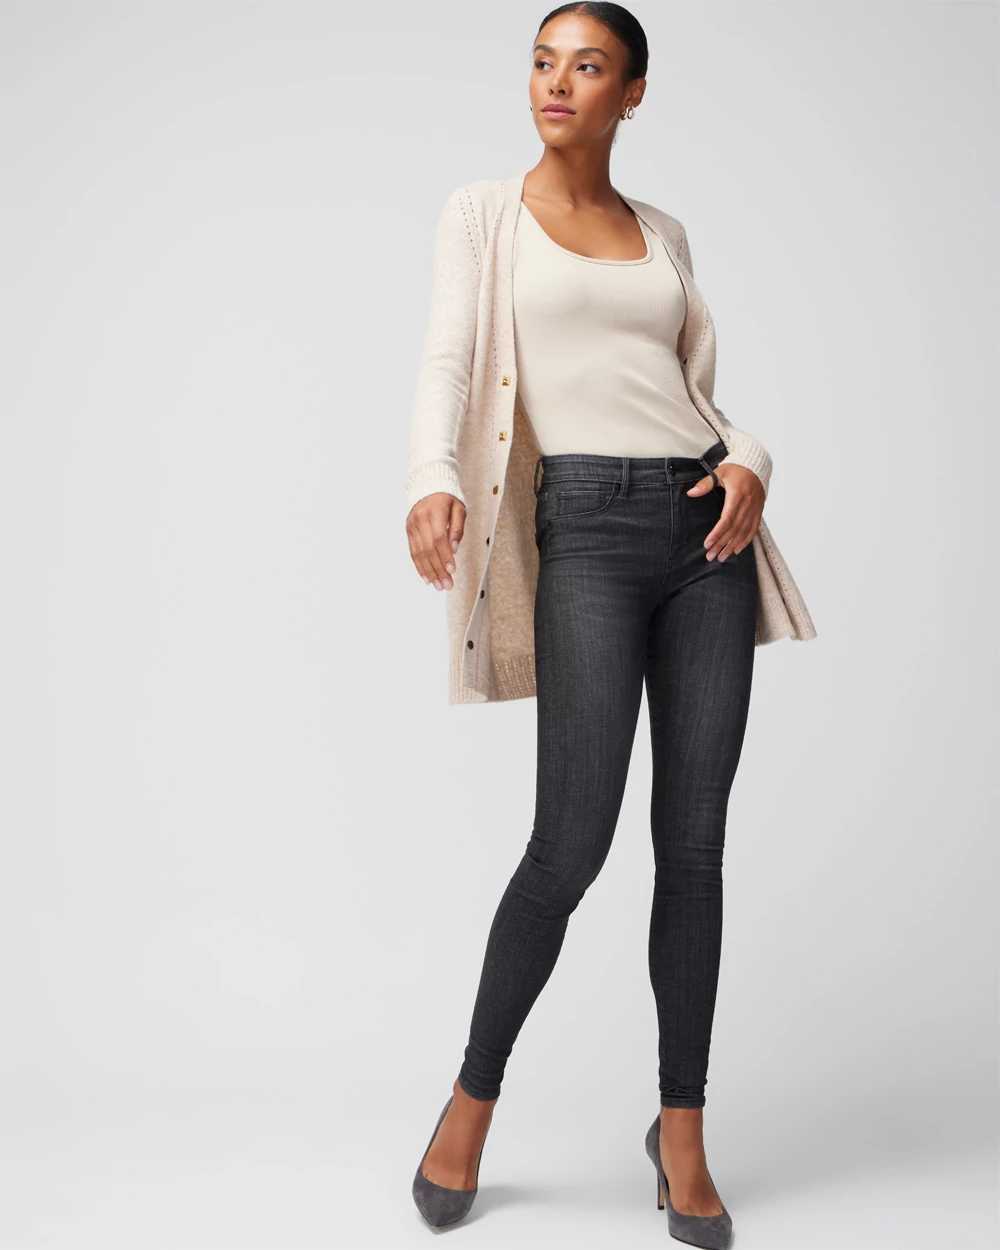 Petite Long Sleeve Boyfriend Cardigan click to view larger image.